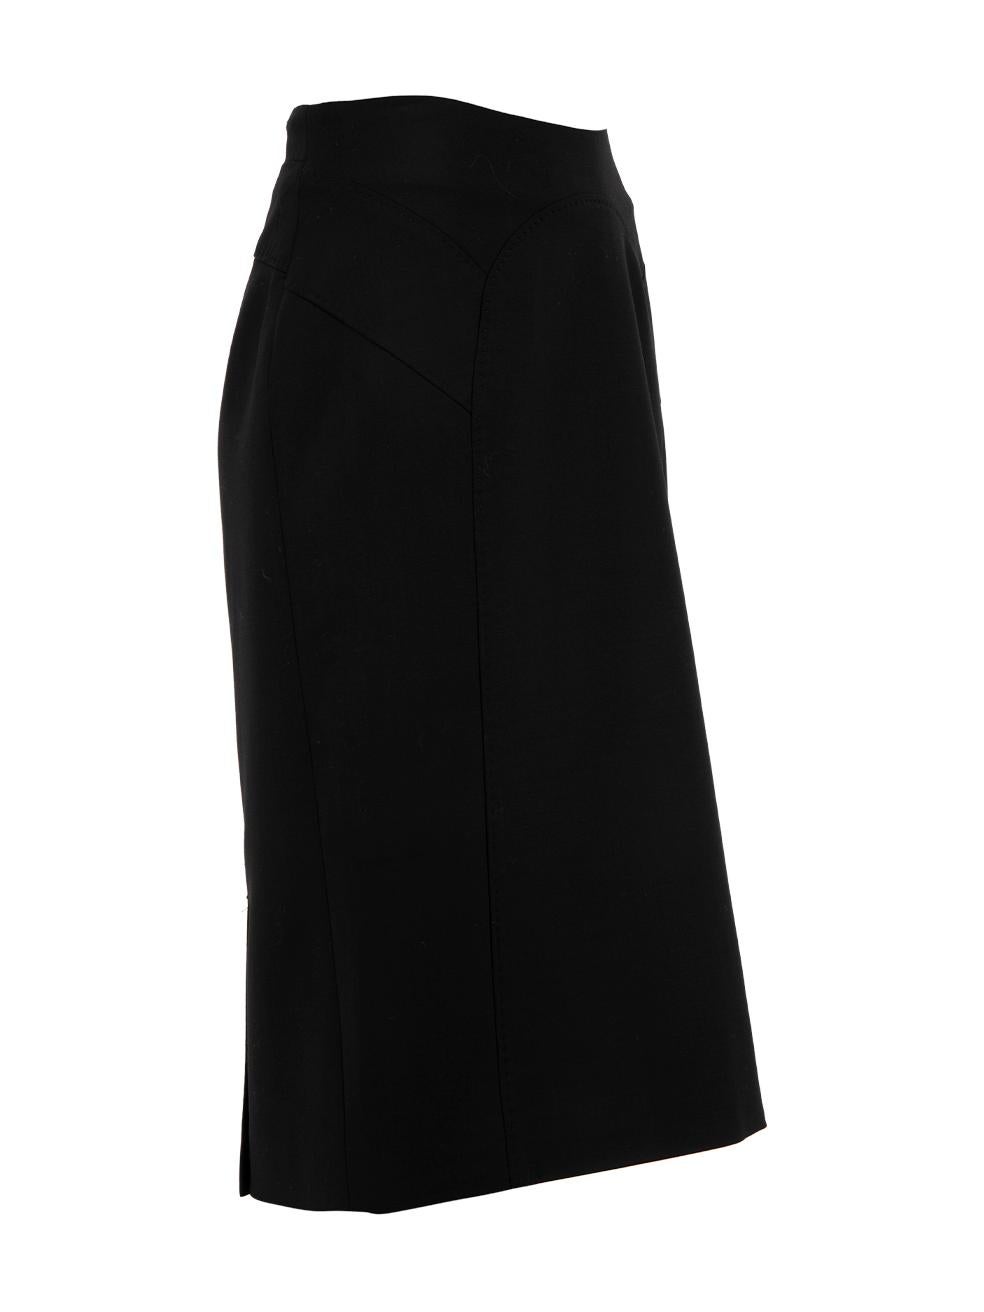 CONDITION is Very good. Hardly any visible wear to skirt is evident on this used Amanda Wakeley designer resale item. Details Black Wool Pencil skirt Knee length Side zip closure with hook and eye Double vent on back Fully lined with silk Made in